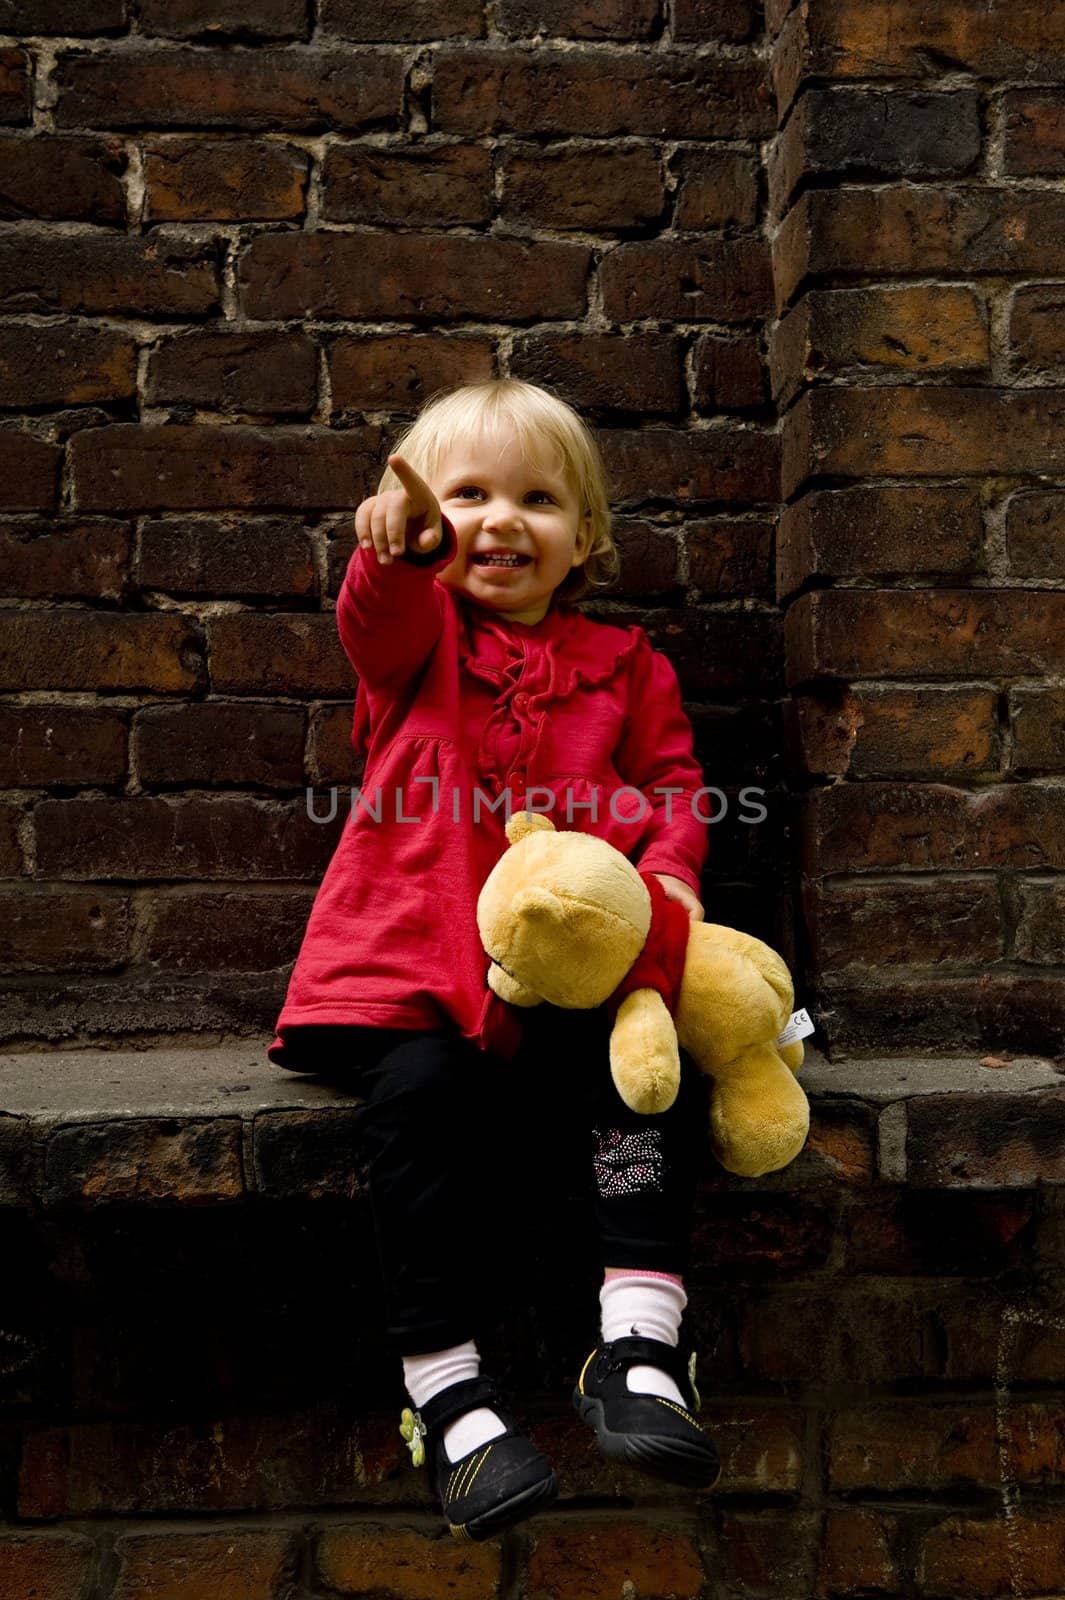 blonde little girl is sitting with teddy bear and laughing